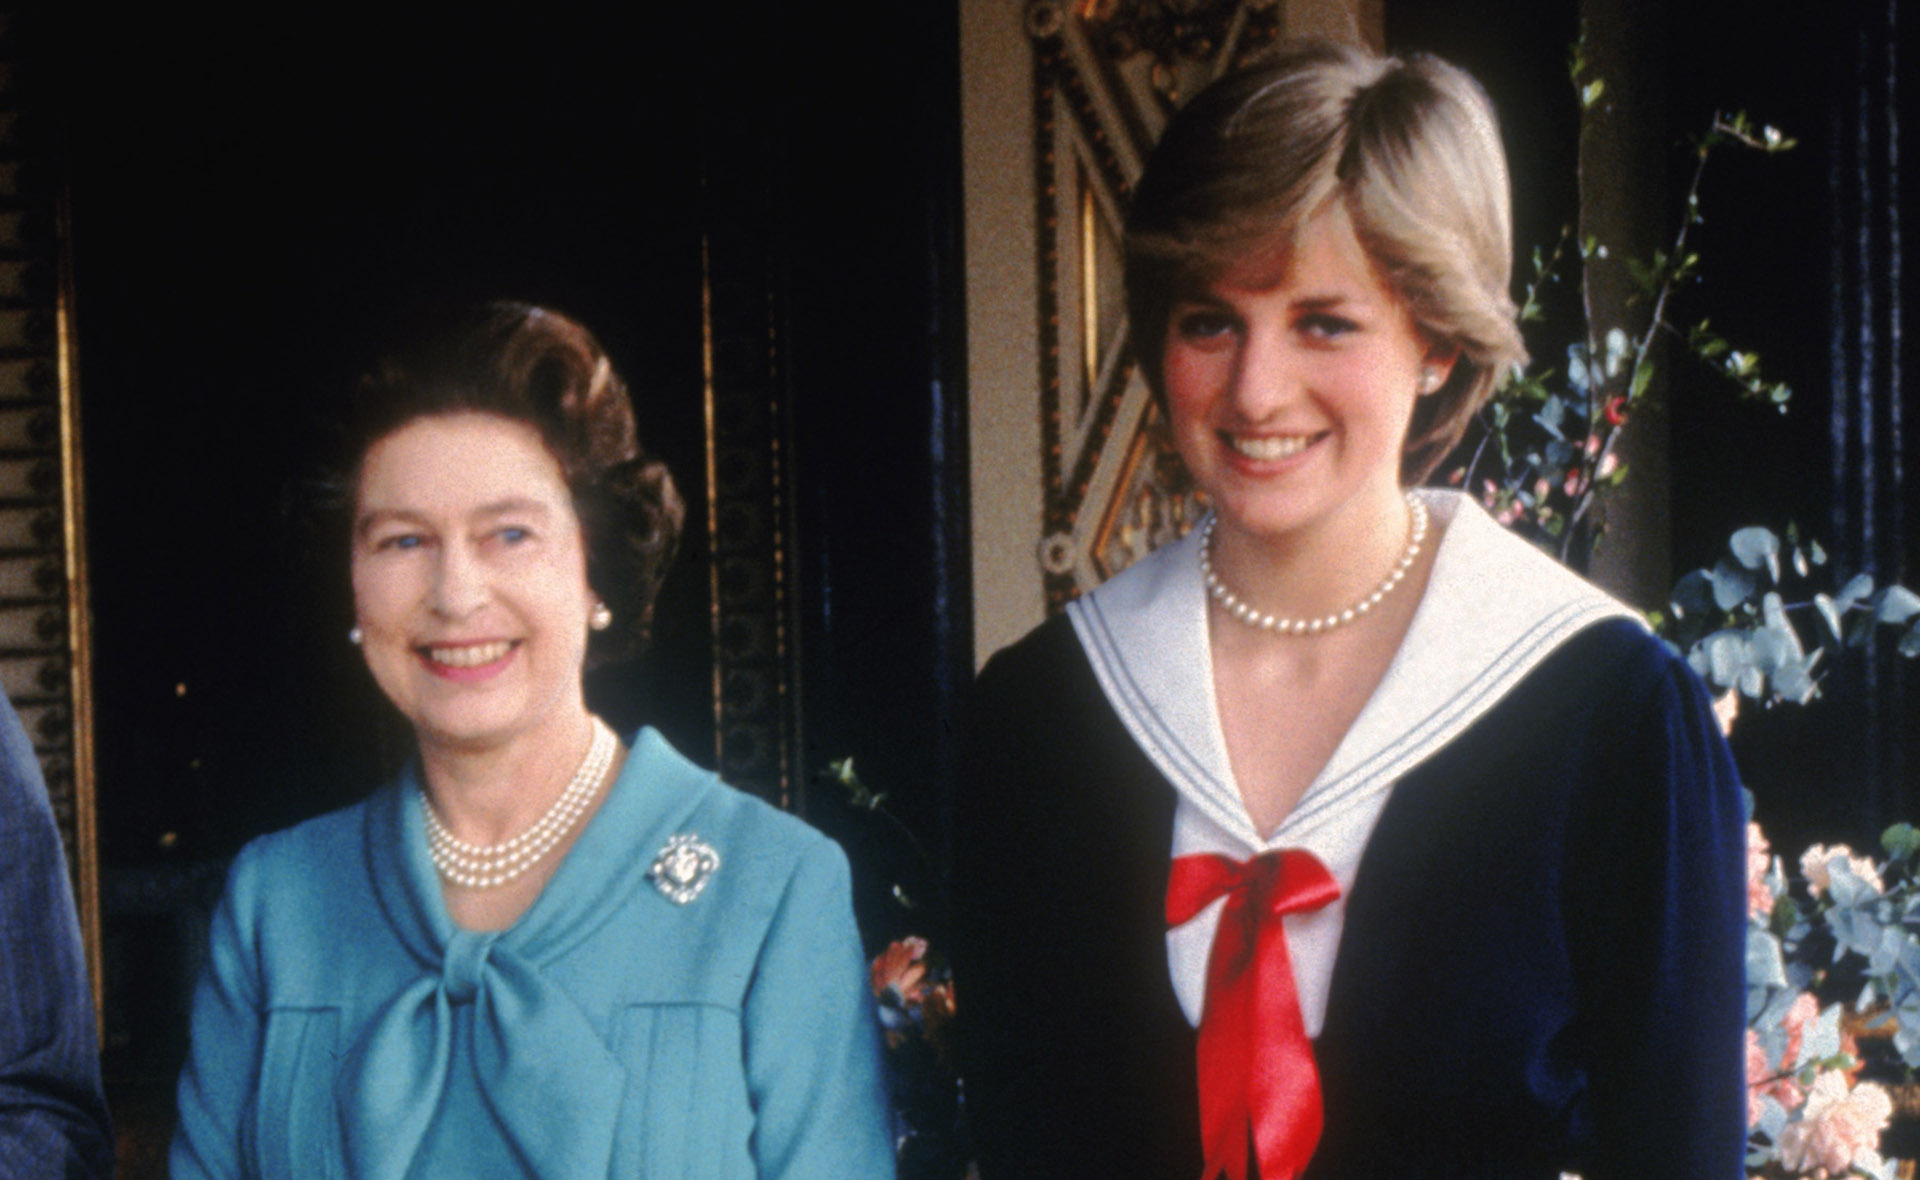 “She is one of us”: The Queen’s relationship with Princess Diana summed up in one touching act